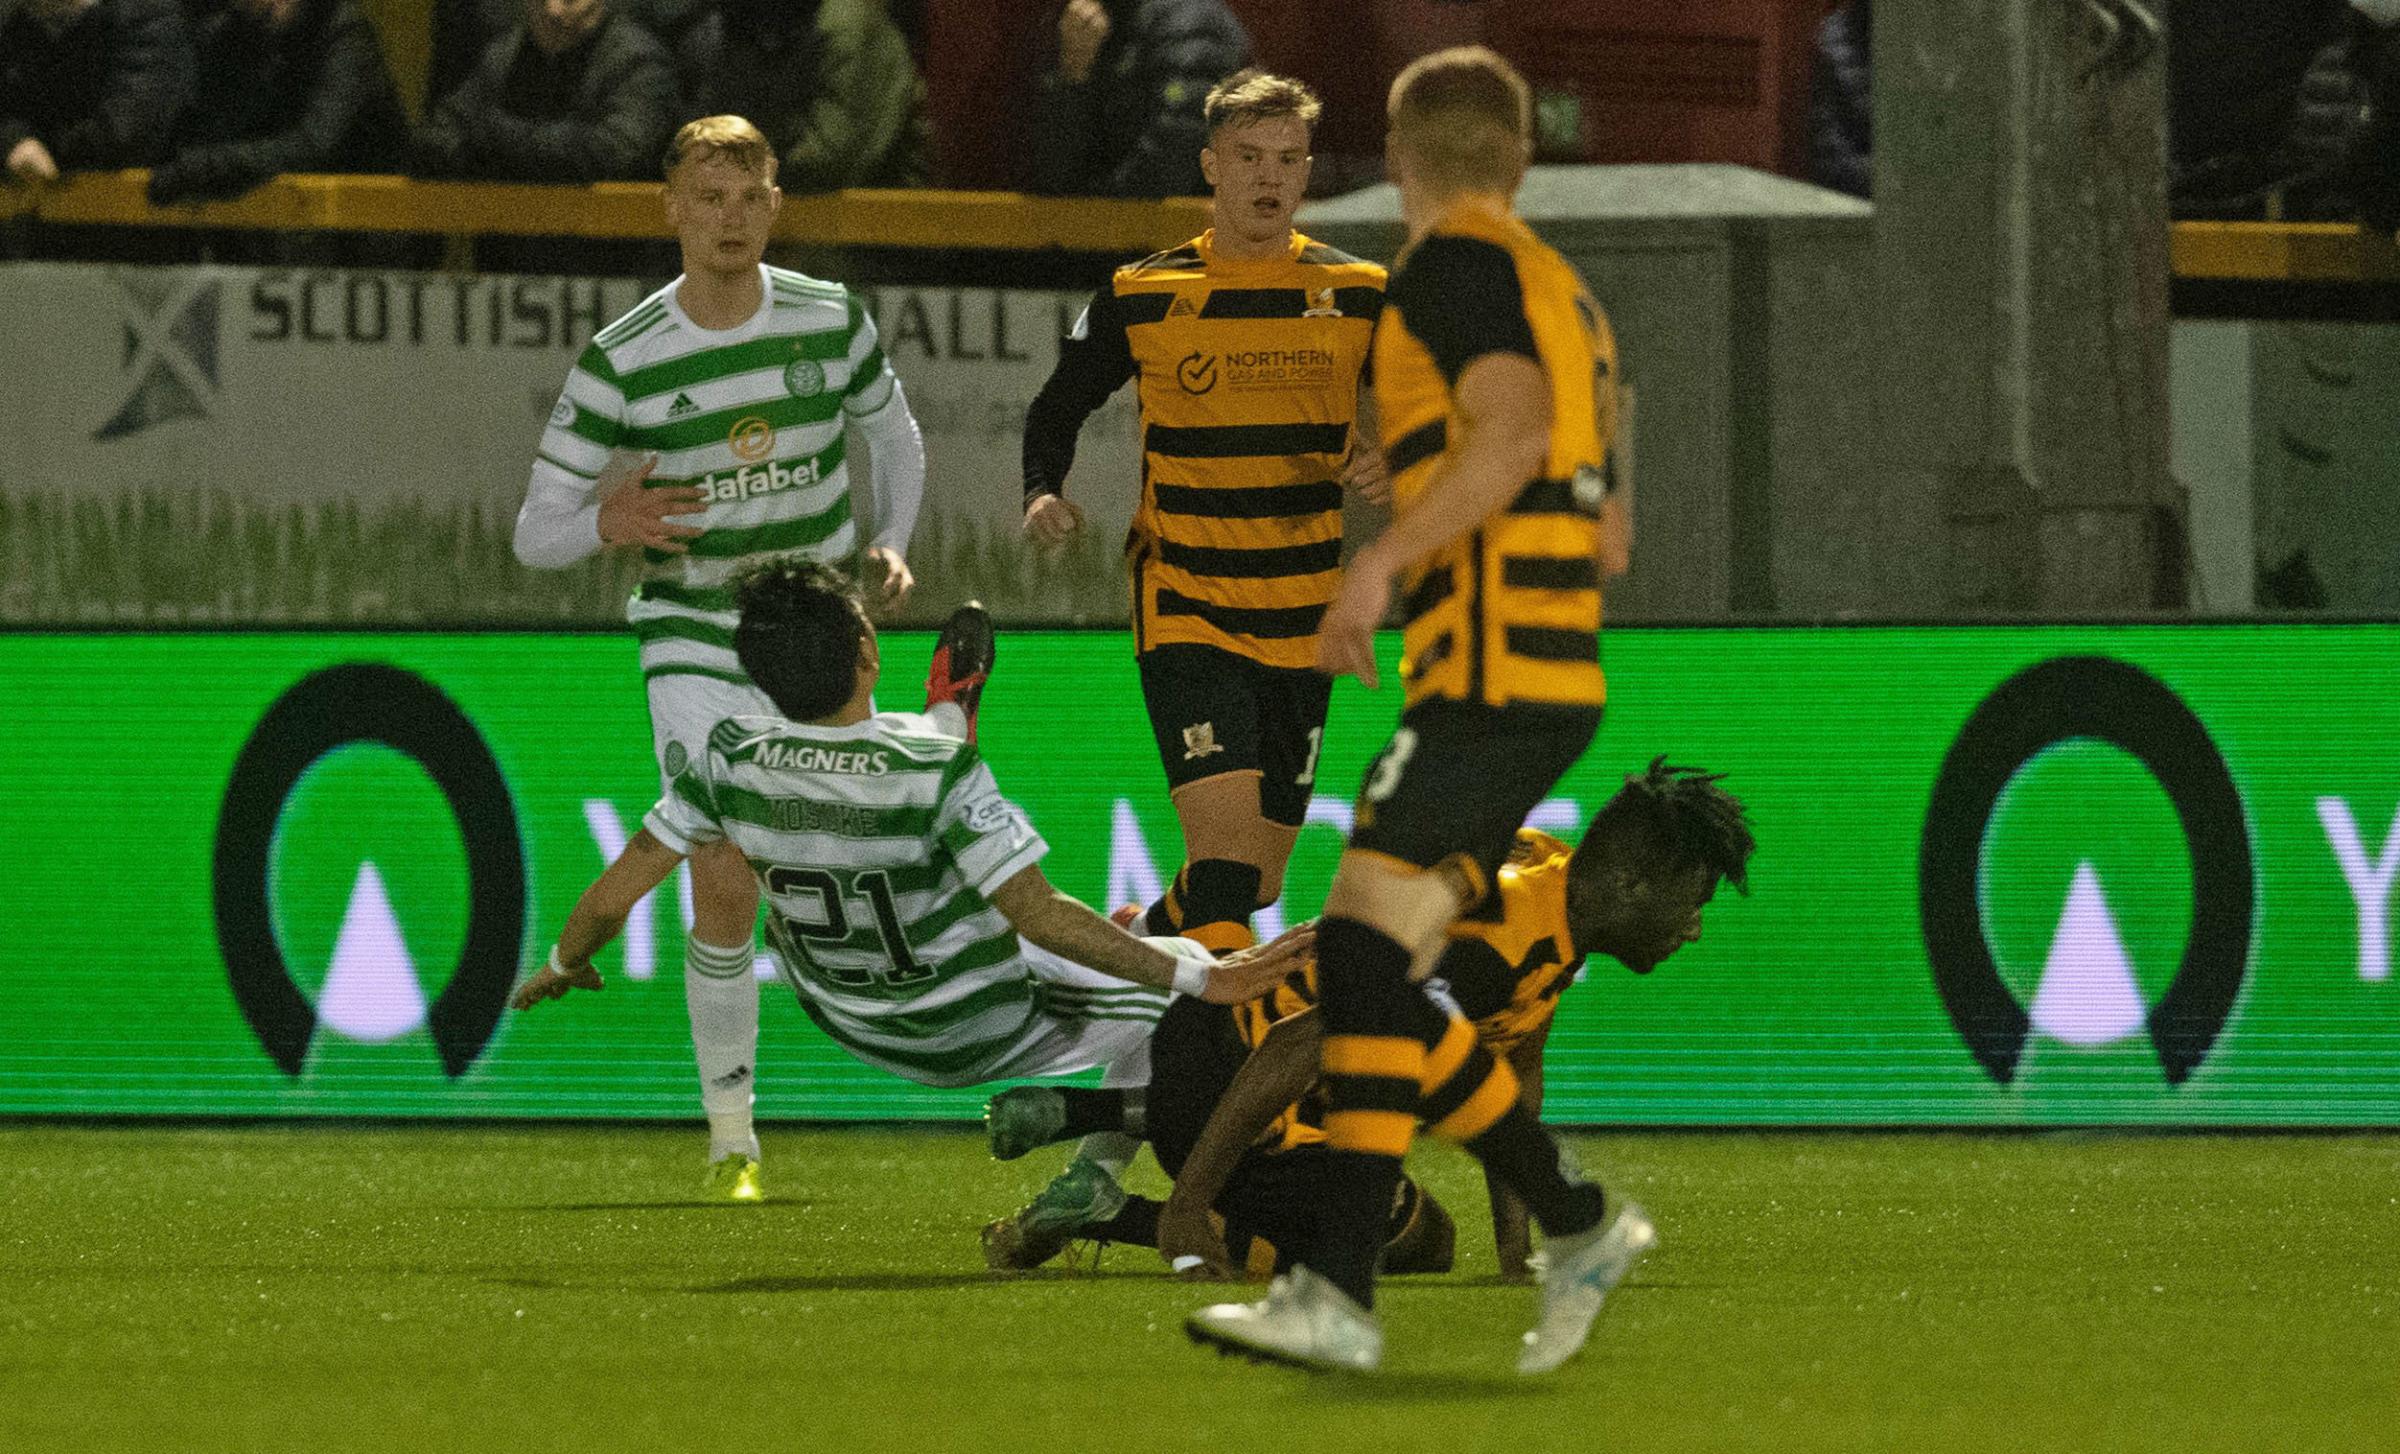 Celtic manager Ange Postecoglou calls for greater protection from referees after 'reckless' challenges at Alloa